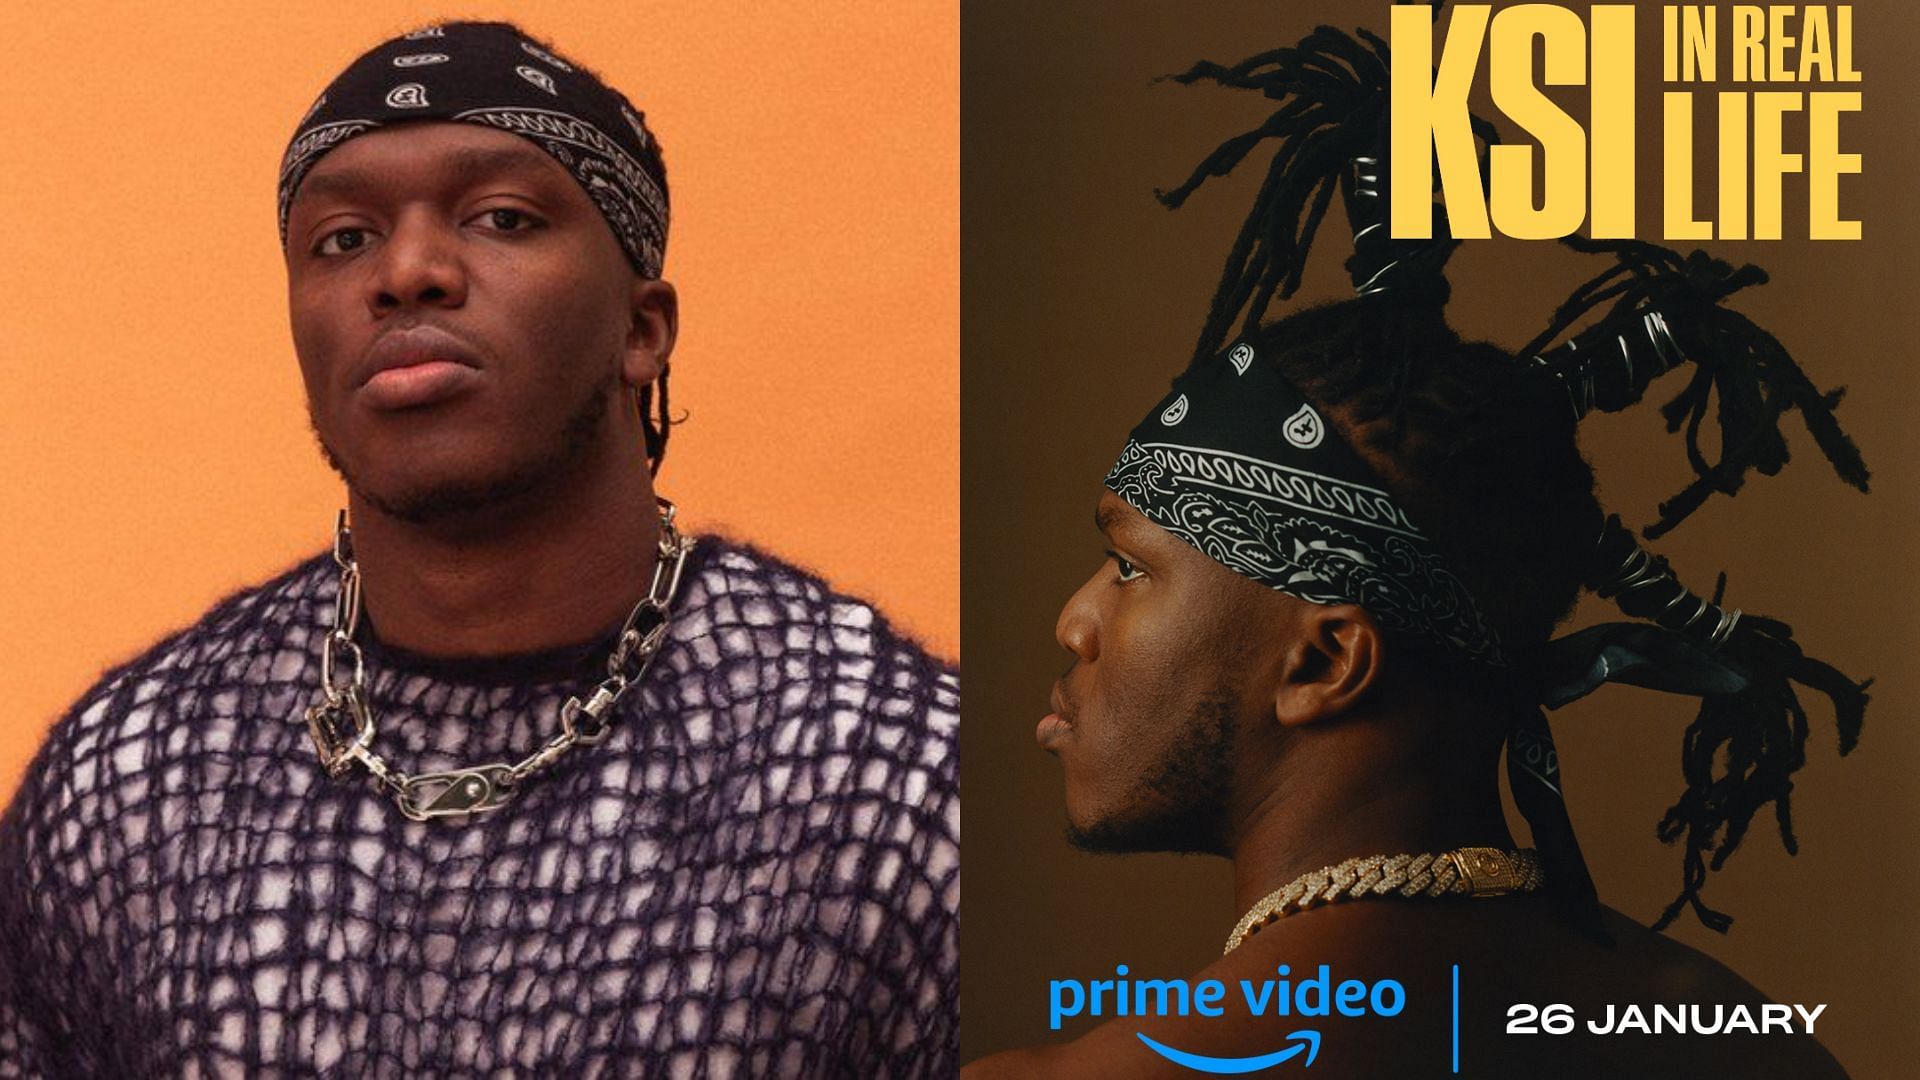 KSI In Real Life documentary Release date, live streaming link, and more